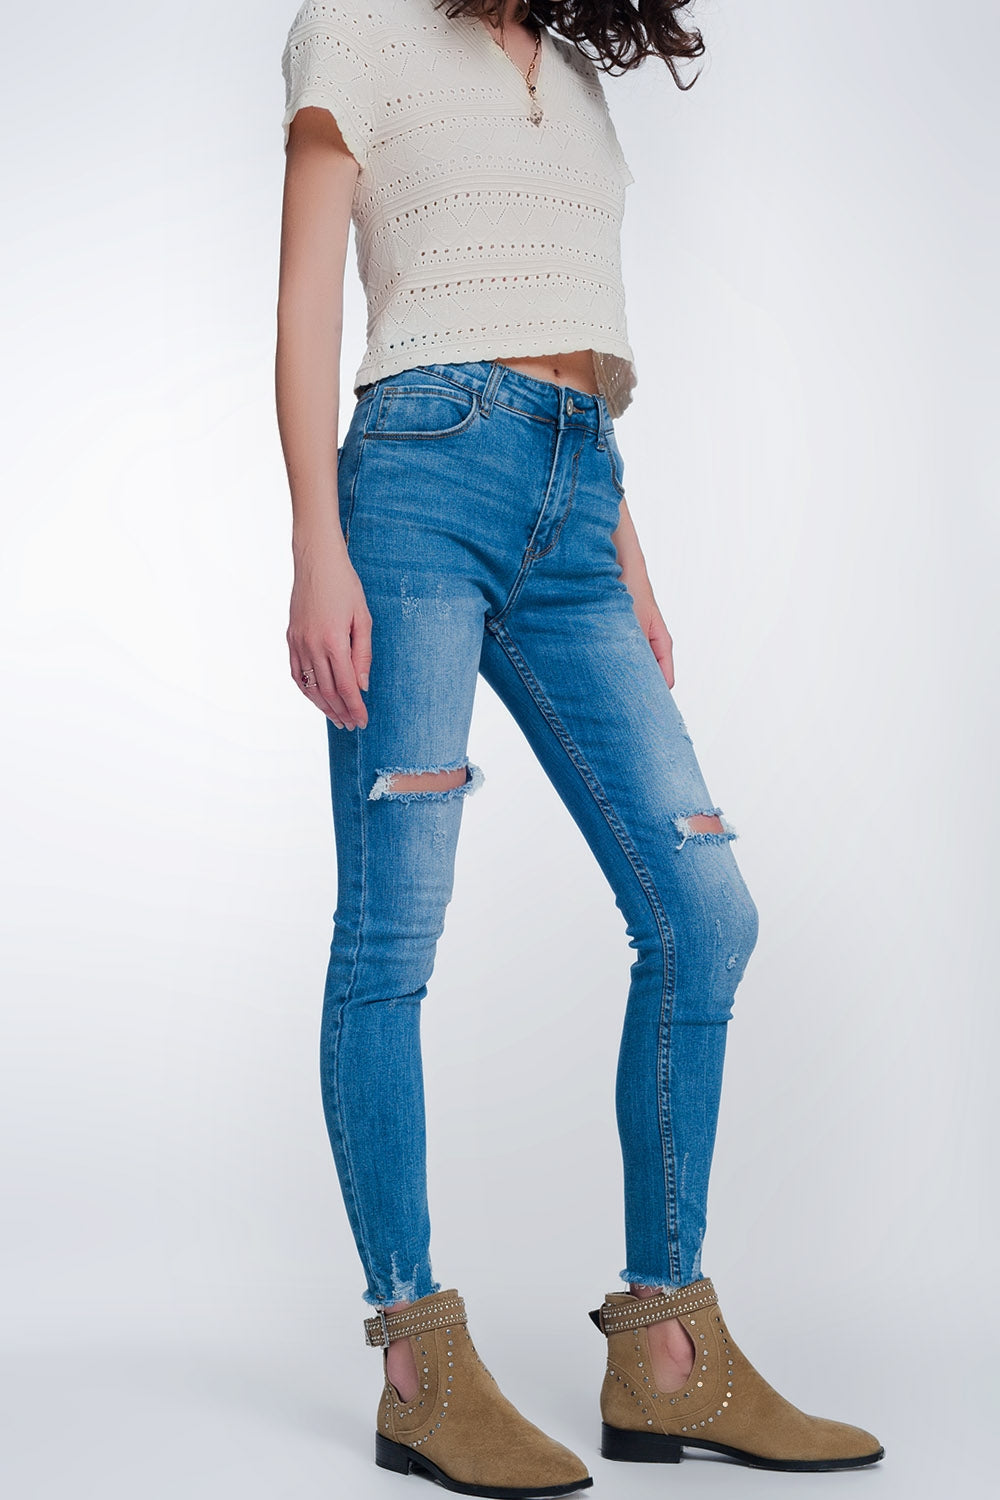 Q2 Mid denim super skinny jeans with holes in the knees